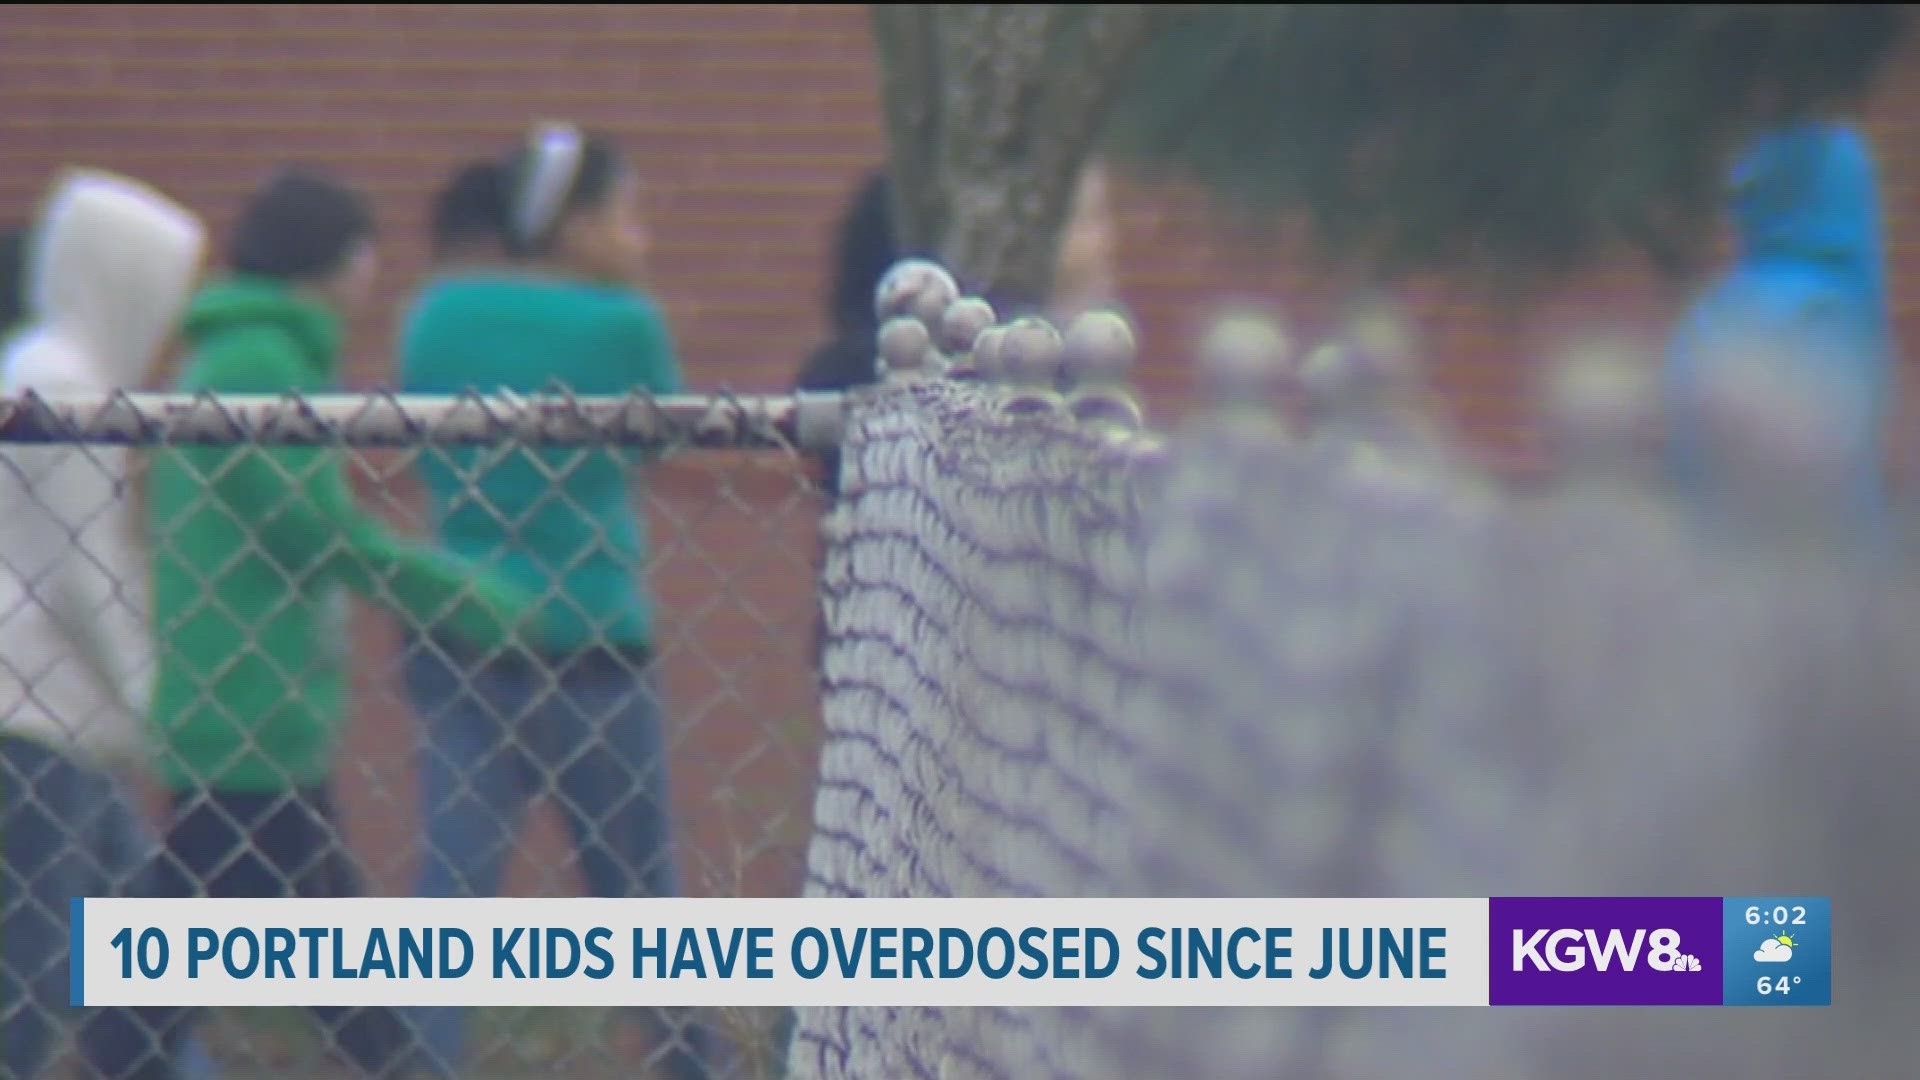 In five of the known cases, police say that the children died. Seven cases were kids under the age of 5, and almost all involved suspected fentanyl.